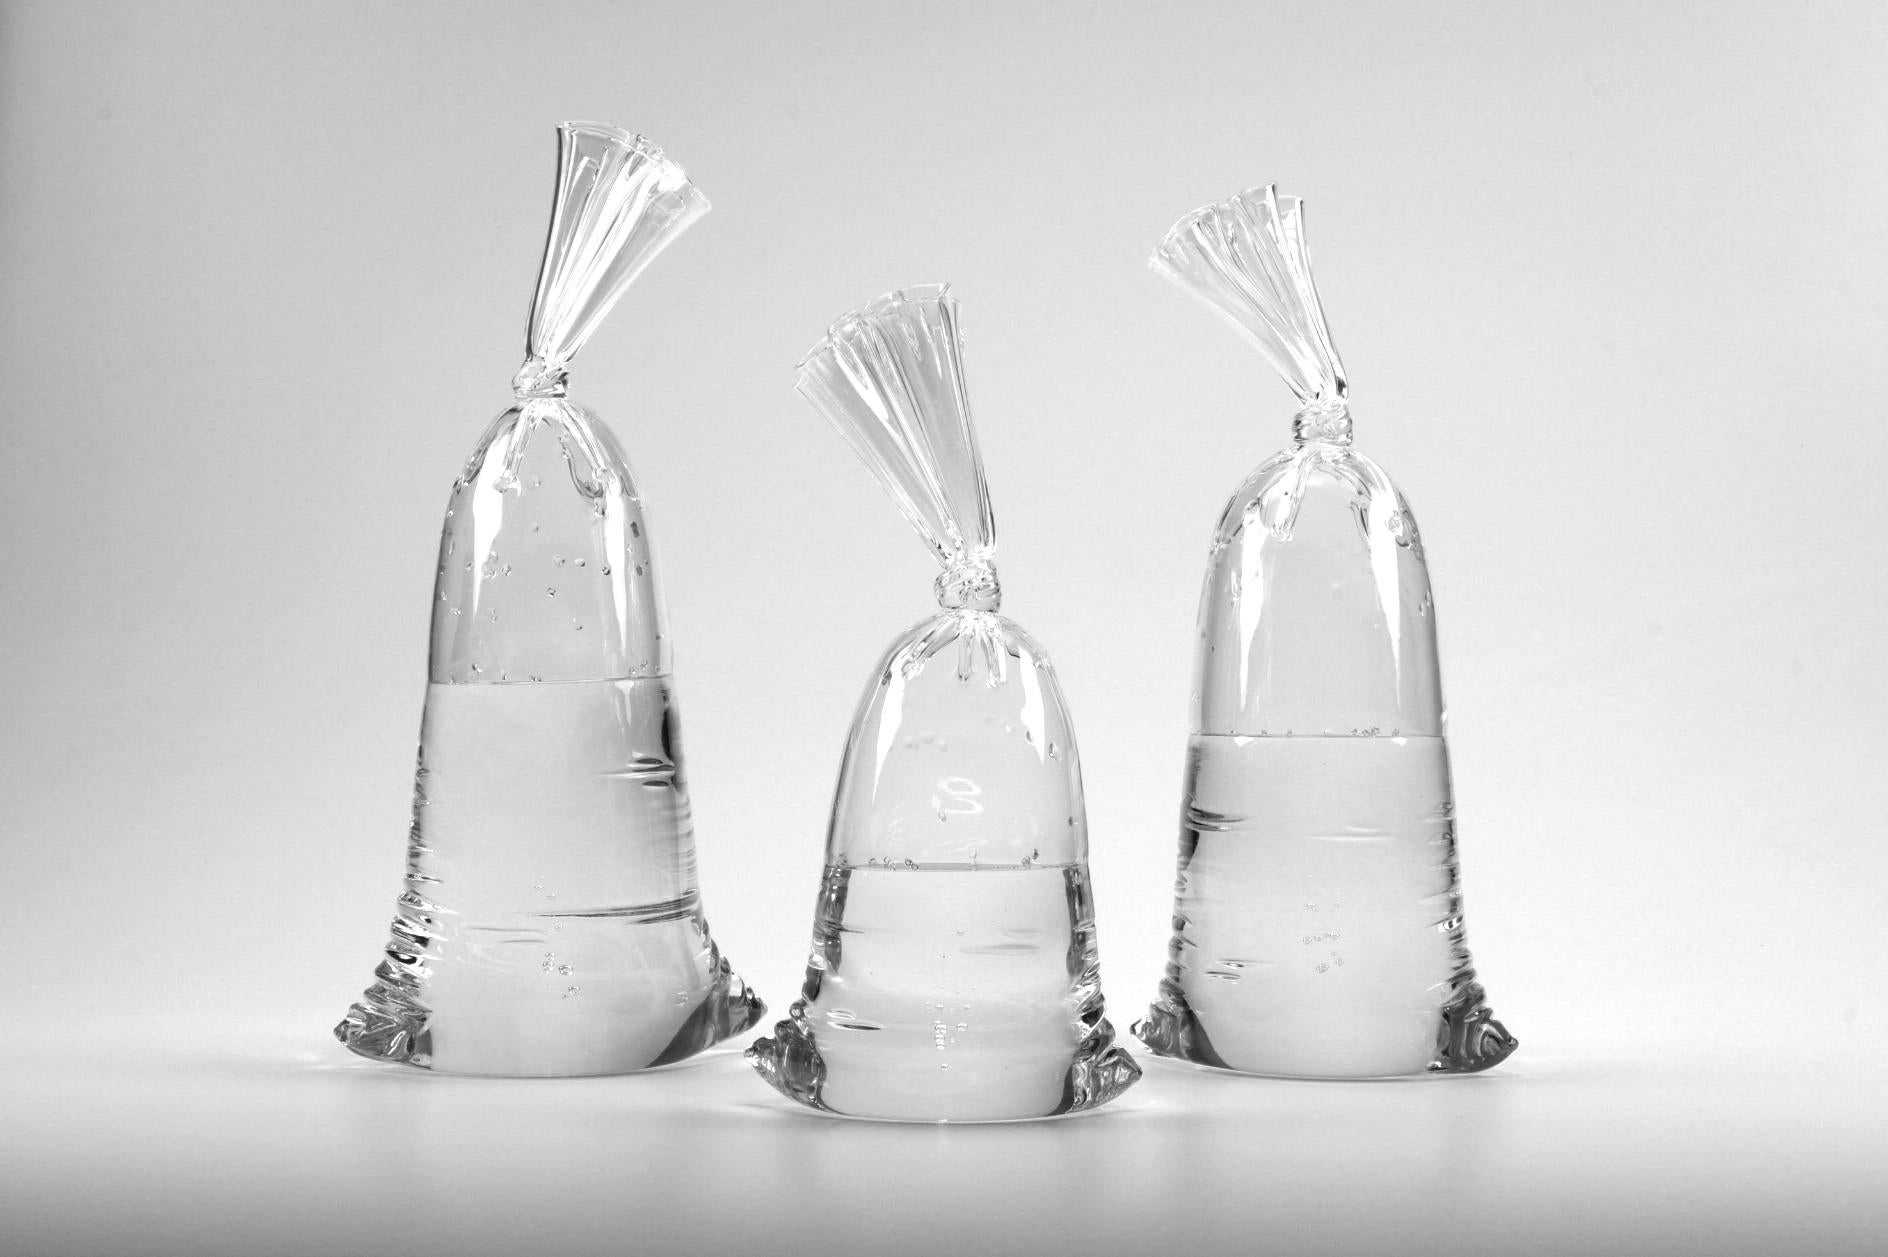 Hyperreal glass water bag trio sculpture installation (set of 3), solid and hollow glass by Dylan Martinez.   

Bag Dimensions (approx): 
Left: 11.75 x 7 x 4.5” 
Center: 14.75 x 7.5 x 4.75” 
Right: 10.25 x 6.25 x 3.75”

Dylan Martinez' hyperreal